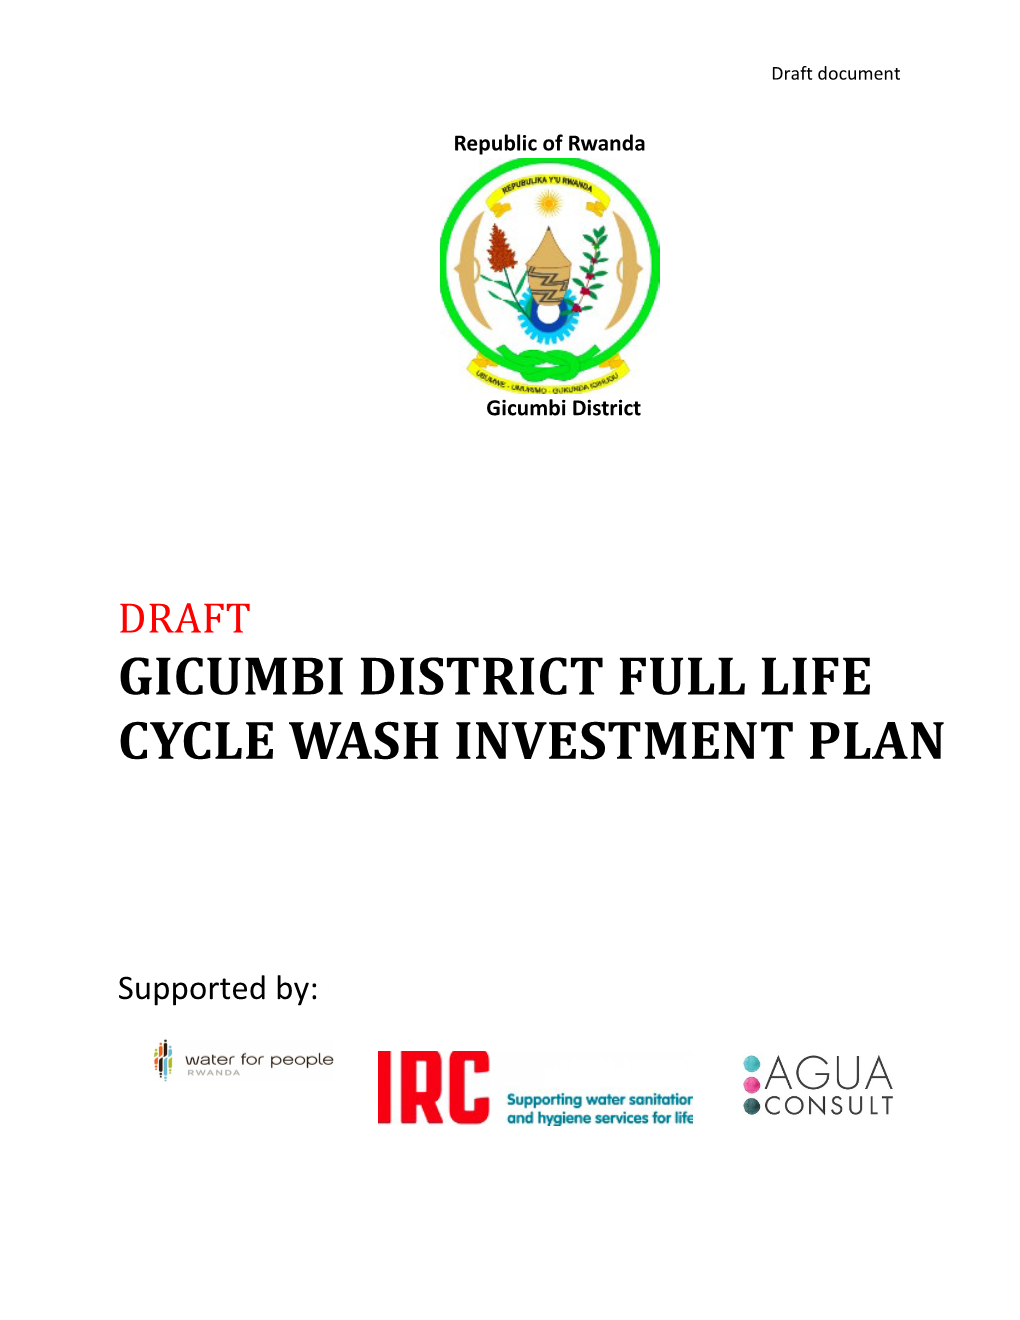 Gicumbi District Full Life Cycle Wash Investment Plan